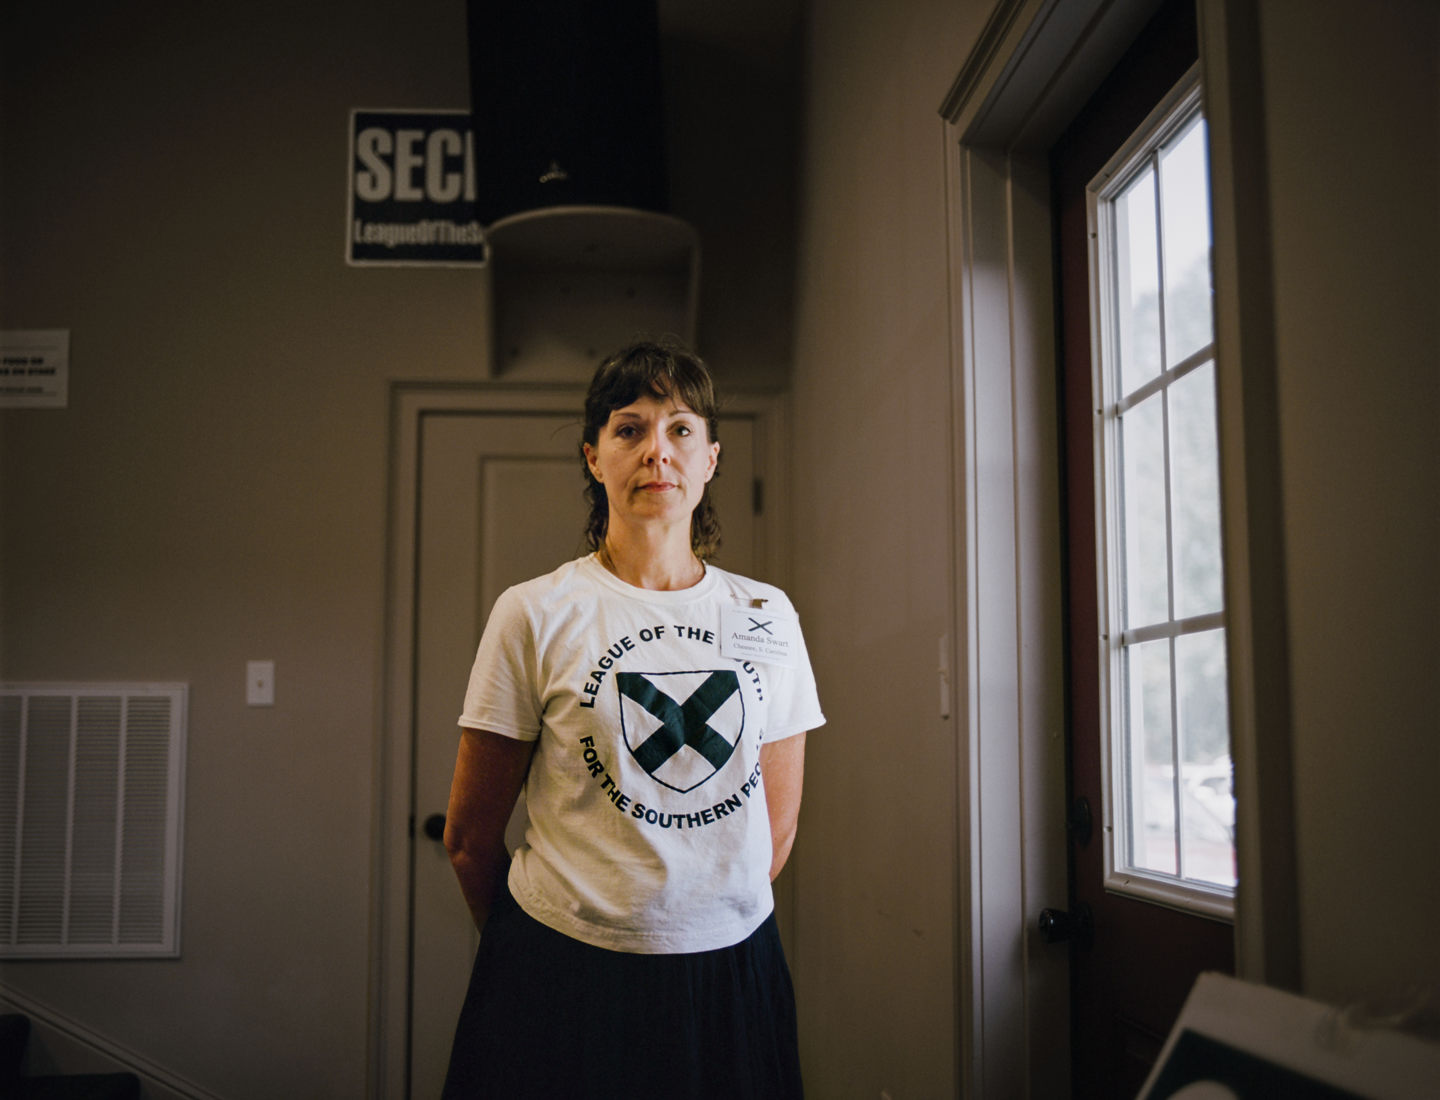 Amanda, the {quote}den mother{quote} of the League of the South, a neo-confederate group that publicly advocates for southern succession, and privately endorses slavery. This portrait was made at their annual convention in Wetumpka, Alabama on June 30, 2017. The League of the South takes great pains to distance itself and differentiate from the KKK, yet promotes many of the exact same ideas under a different outward facing rhetorical stance. The argument about “optics” pits different hate groups against each other as they vie for local power. LOS is almost completely male in its power structure and women like Amanda can only play informal roles. Amanda is not from the south but when she met her now husband online as his nutritionist and moved to Mississippi to be with him, she joined. She said that all the people at the meeting (which did include Klan members) were the greatest people she’d ever met. This reporter was forcefully ejected and escorted out of the meeting without clear cause. 